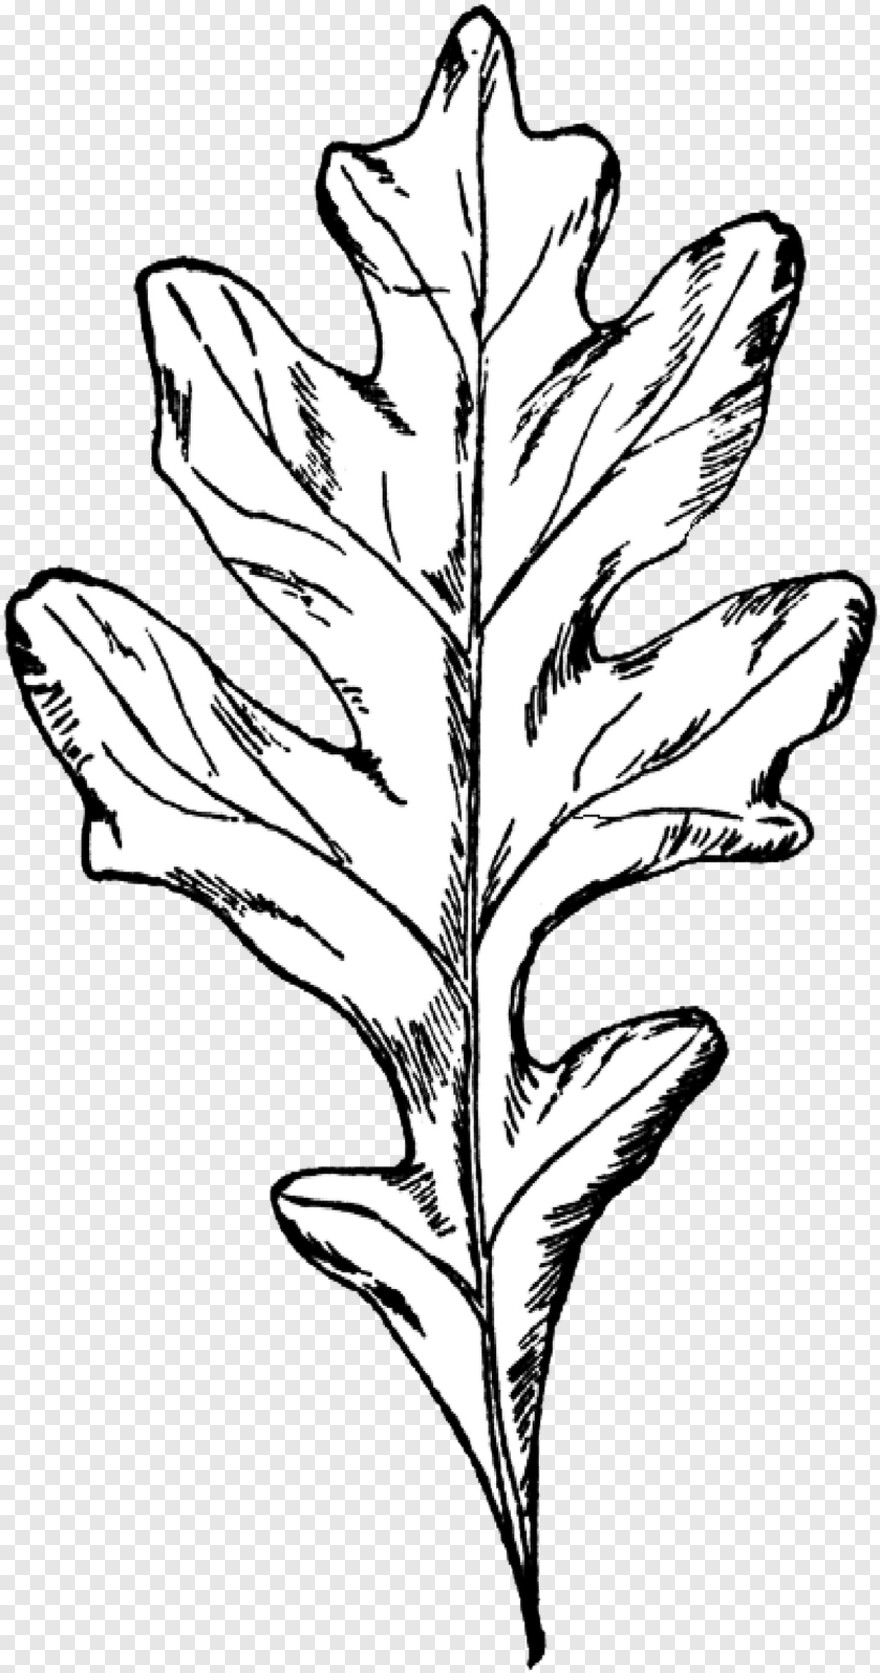 leaf-clipart # 355986